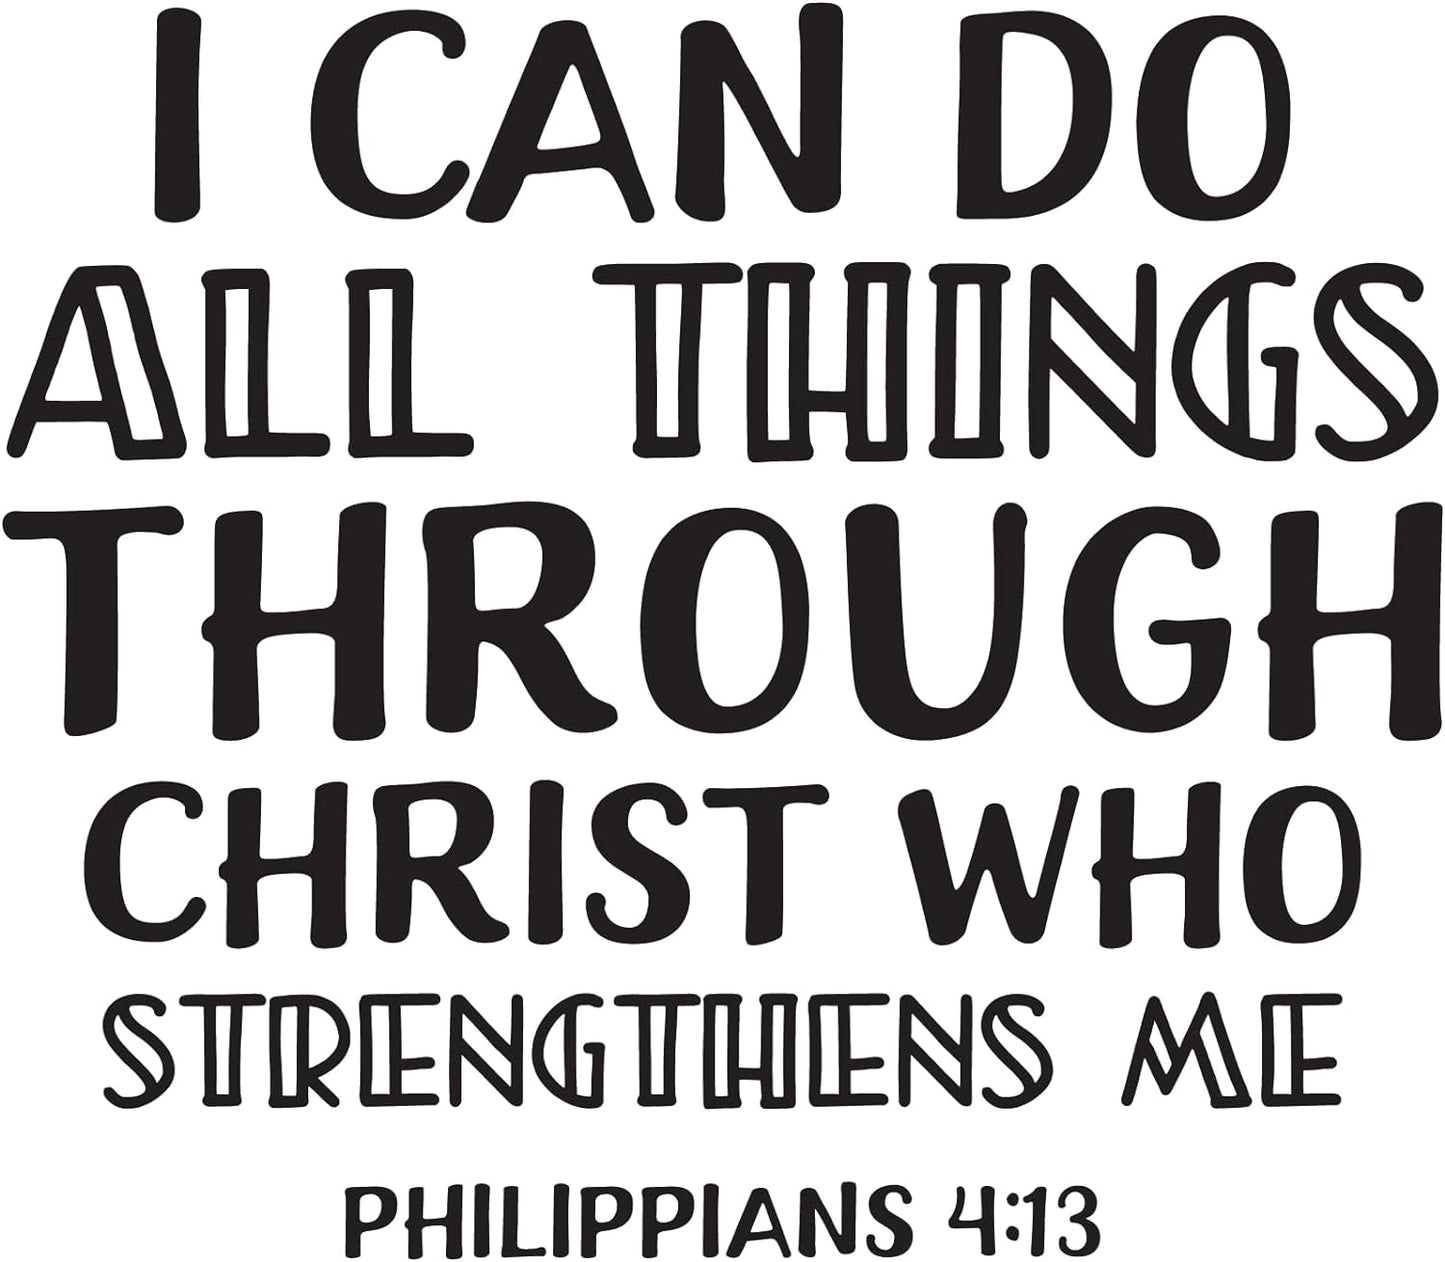 Inspirational Quote "I Can Do All Things Through Christ Who Strengthens Me PHILIPPIANS 4 : 13" Motivational Sticker Vinyl Decal Motivation Stickers- 5" Vinyl Sticker Waterproof